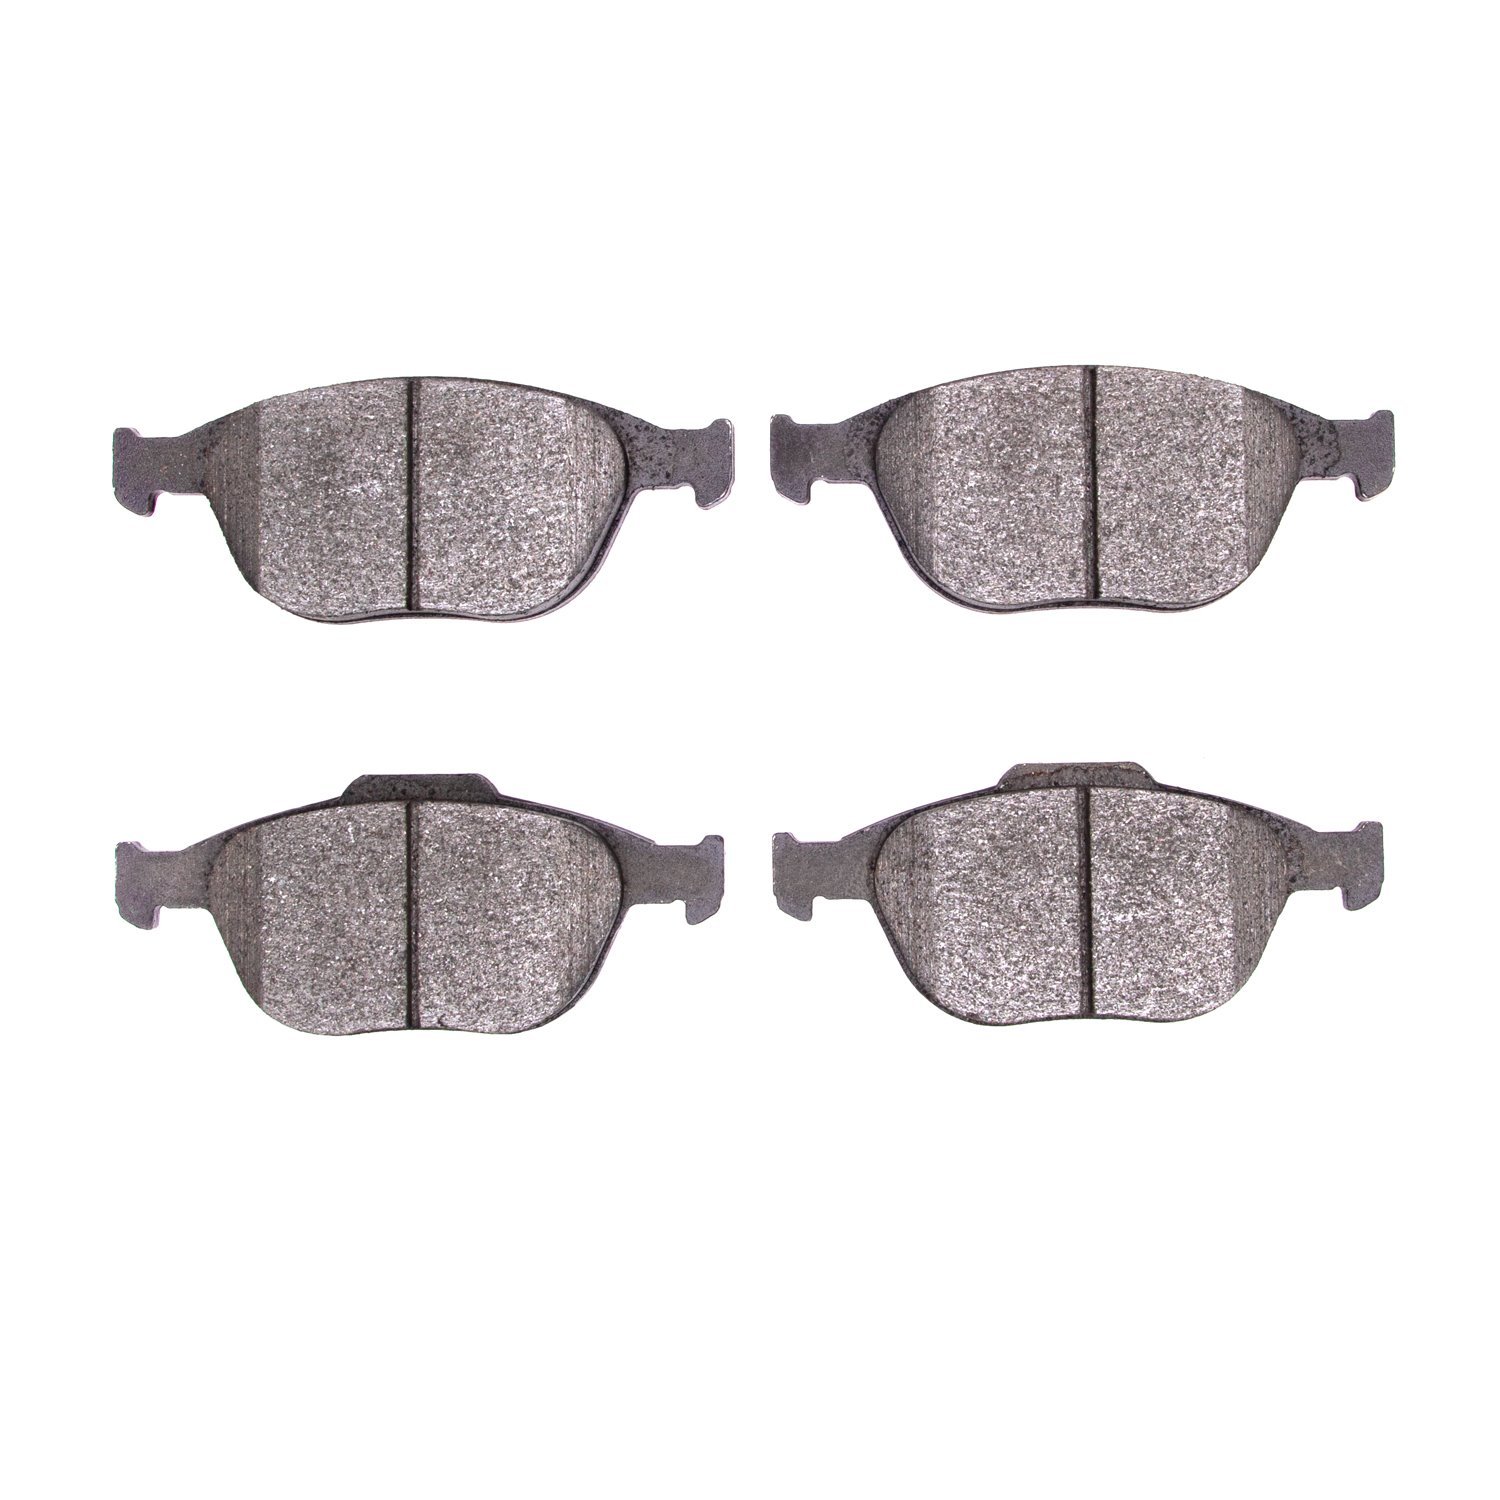 Optimum OE Brake Pads, 2002-2013 Ford/Lincoln/Mercury/Mazda, Position: Front